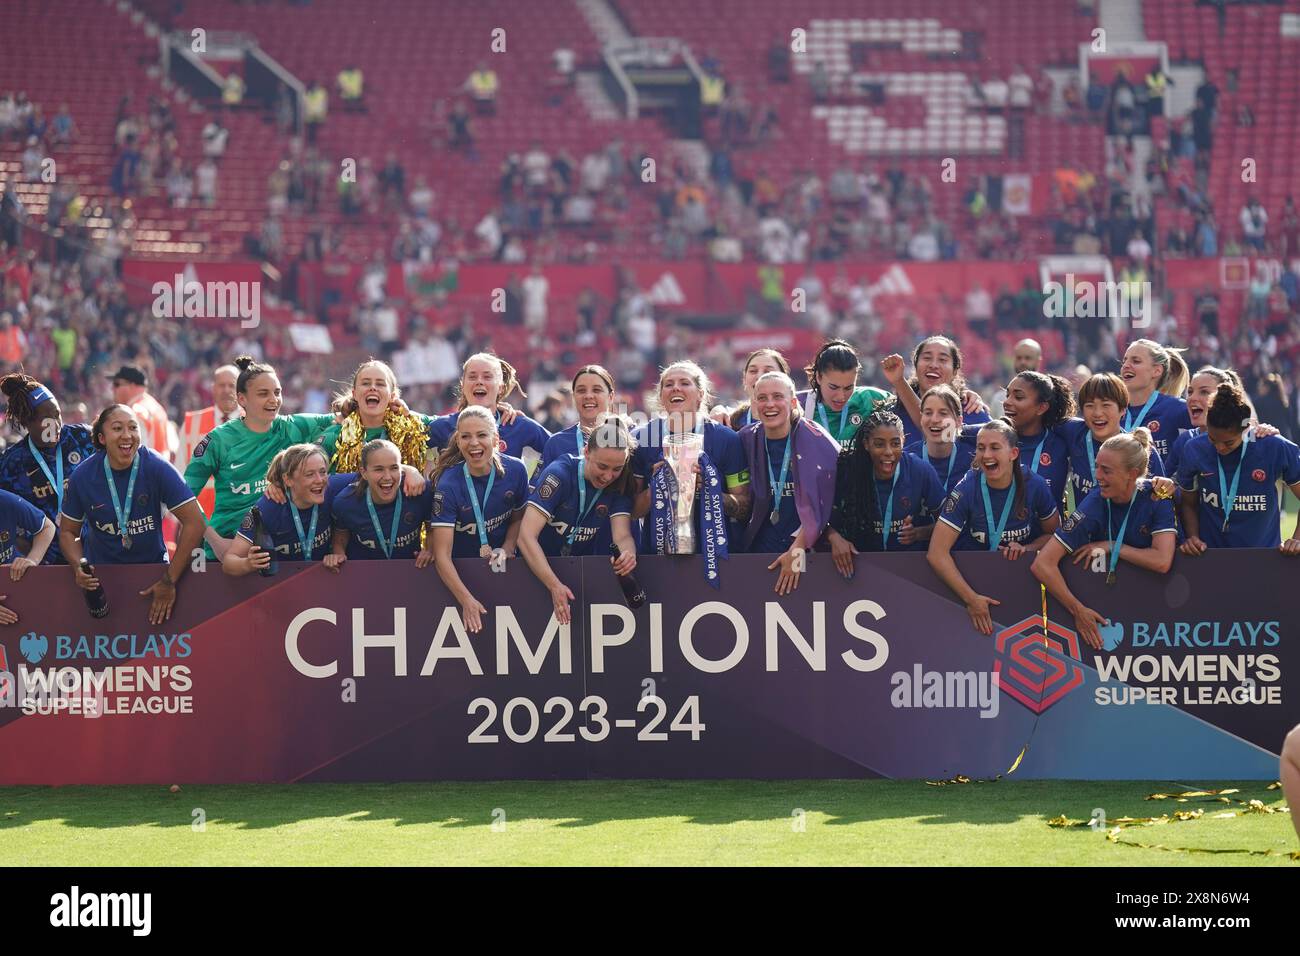 Manchester United Women v Chelsea Women Women’s Super League. 18.5.24  Old Trafford. ENGLAND - May 18.4.24 The Chelsea Women’s Team celebrate after winning the Women’s Super League  during the Women’s Super League match between Manchester United and Chelsea at Old Trafford Manchester on May 18 2024 in Manchester England. Stock Photo